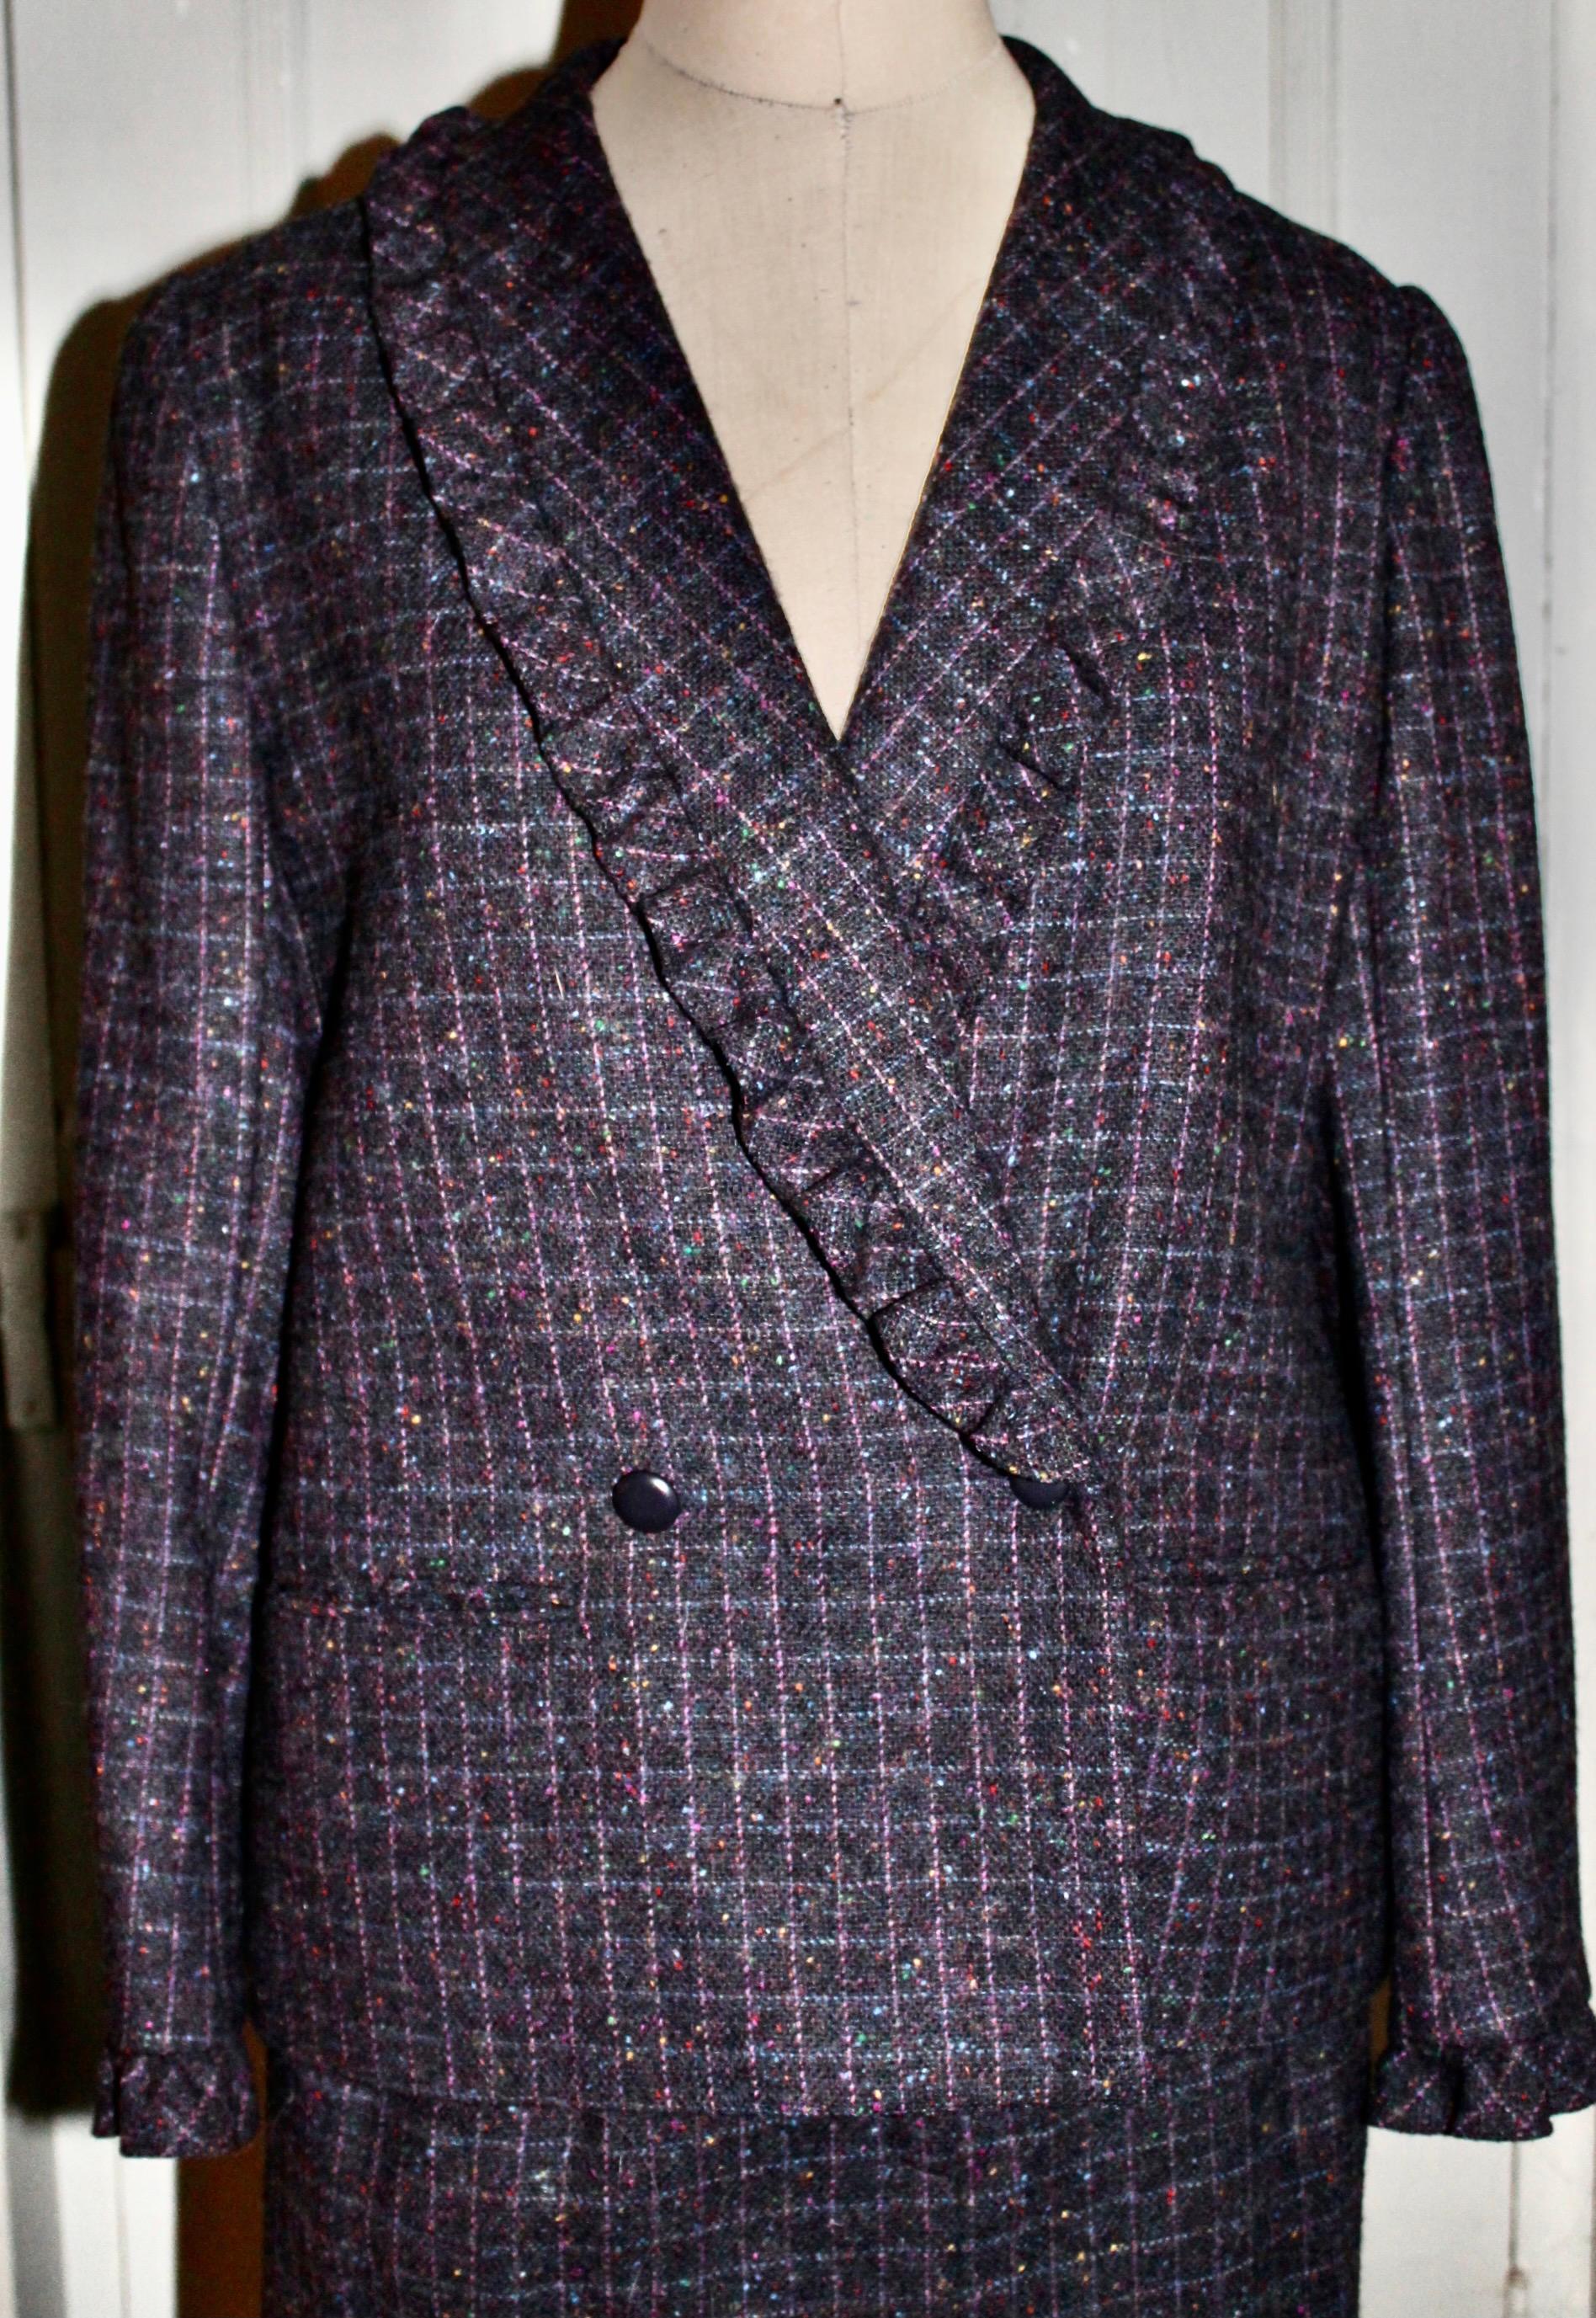 Nina Ricci Boutique Suit, Paris France In Good Condition For Sale In Sharon, CT